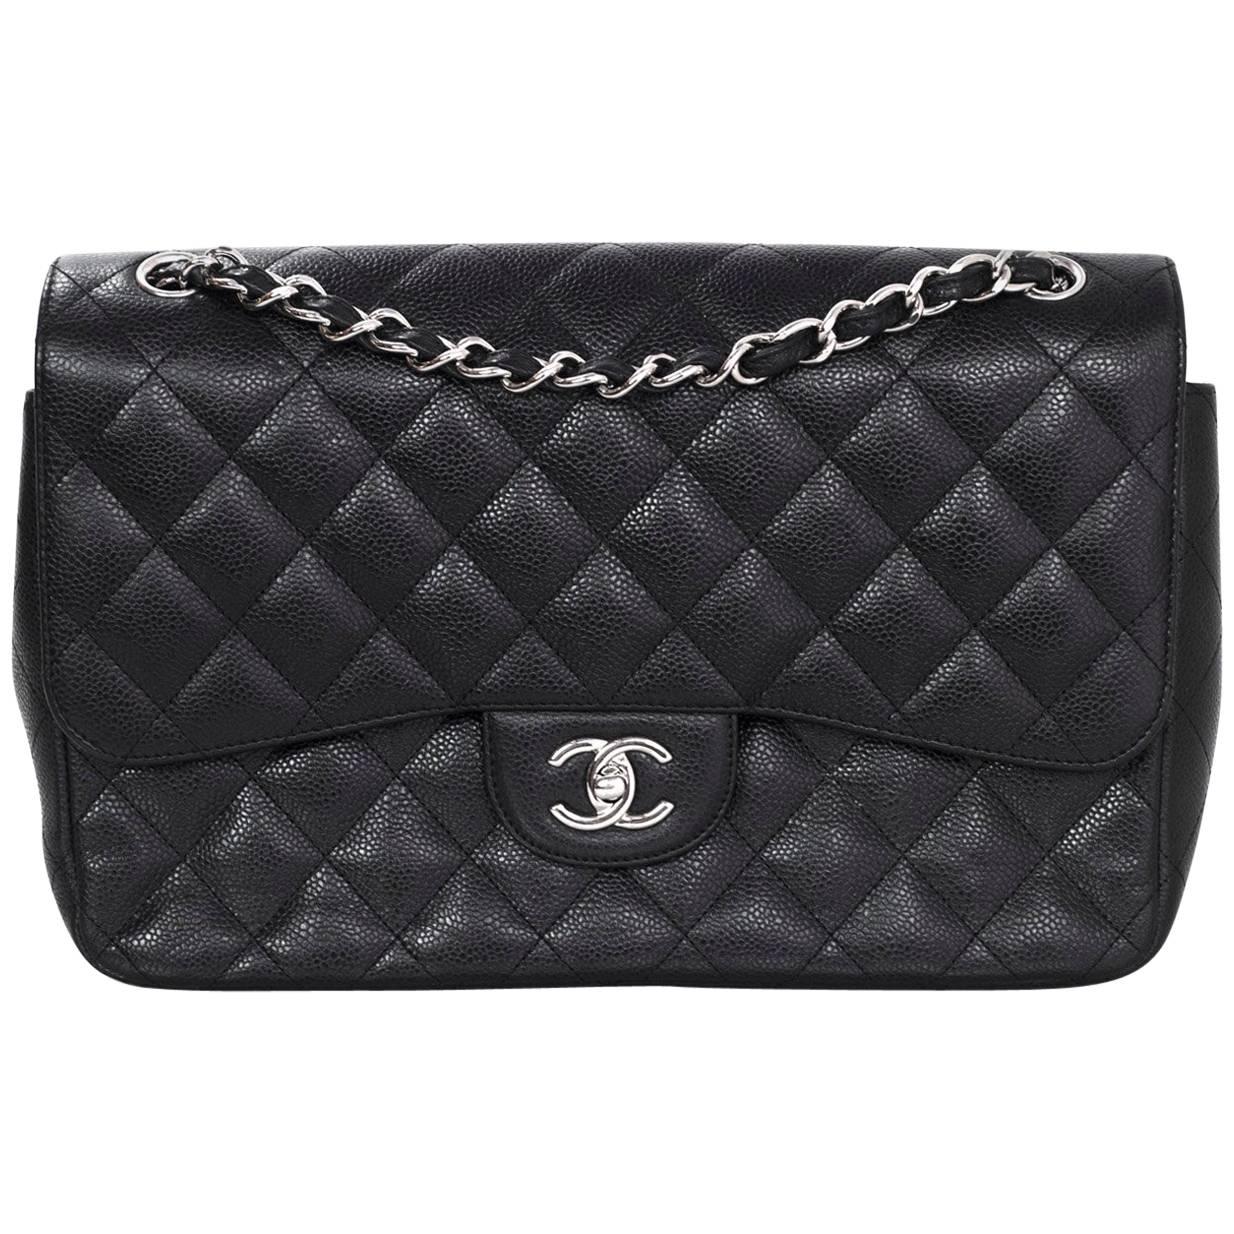 Chanel Black Caviar Leather Quilted Double Flap Jumbo Bag with SHW rt. $5, 900